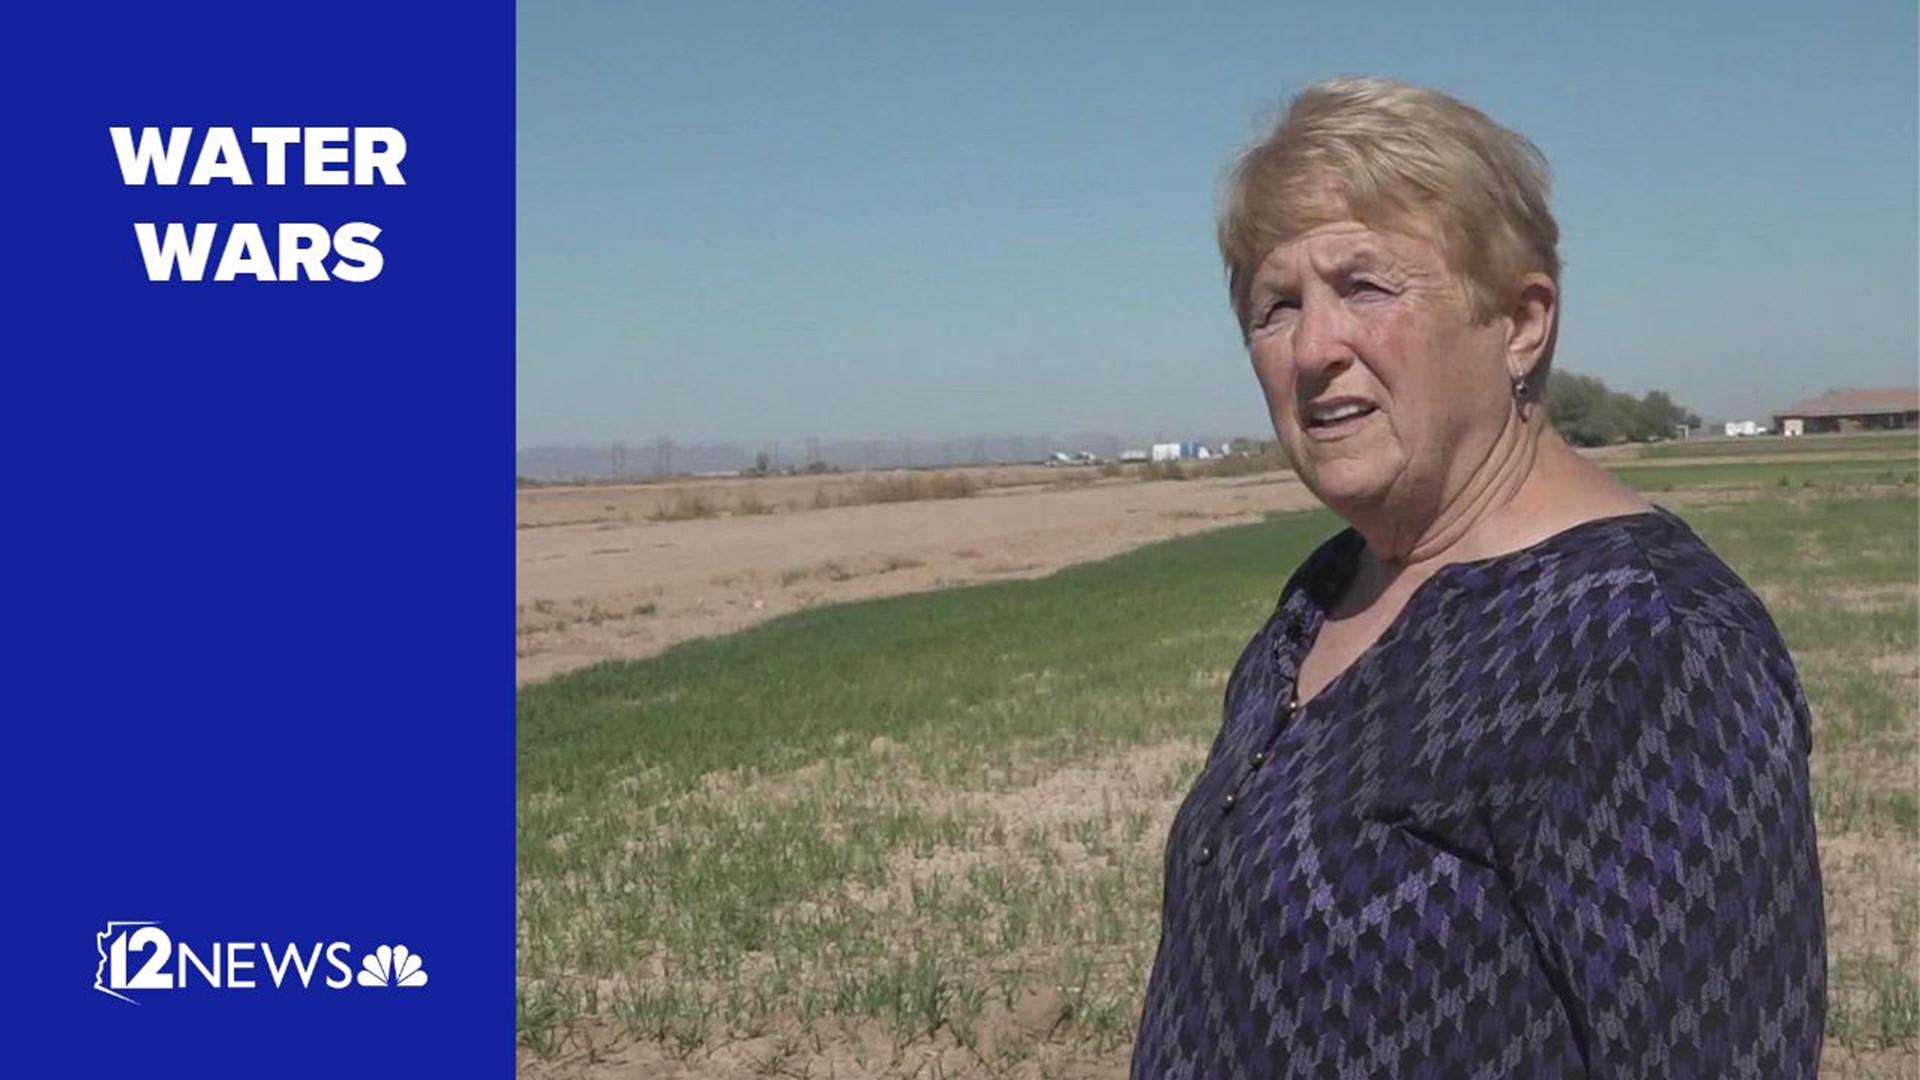 With Arizona facing a drought, farmers across the state say their businesses are deeply impacted.